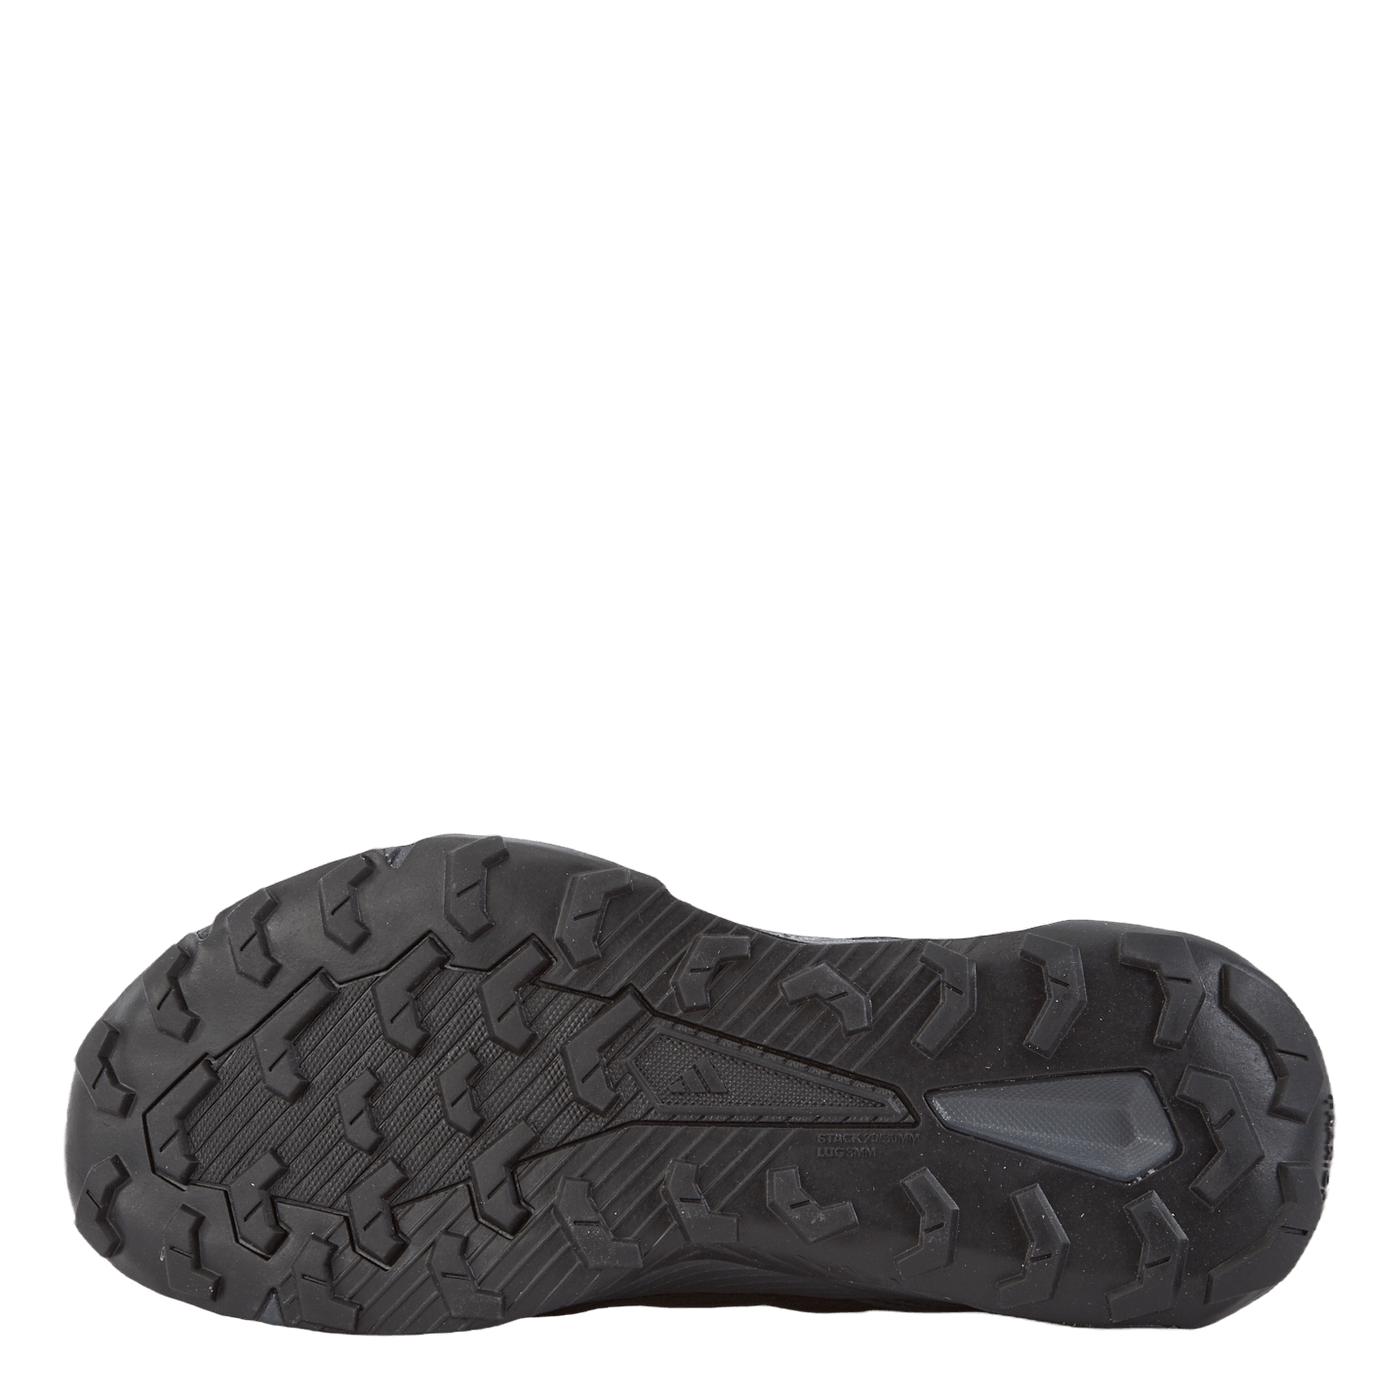 Tracefinder Trail Running Shoes Core Black / Grey Six / Solar Red